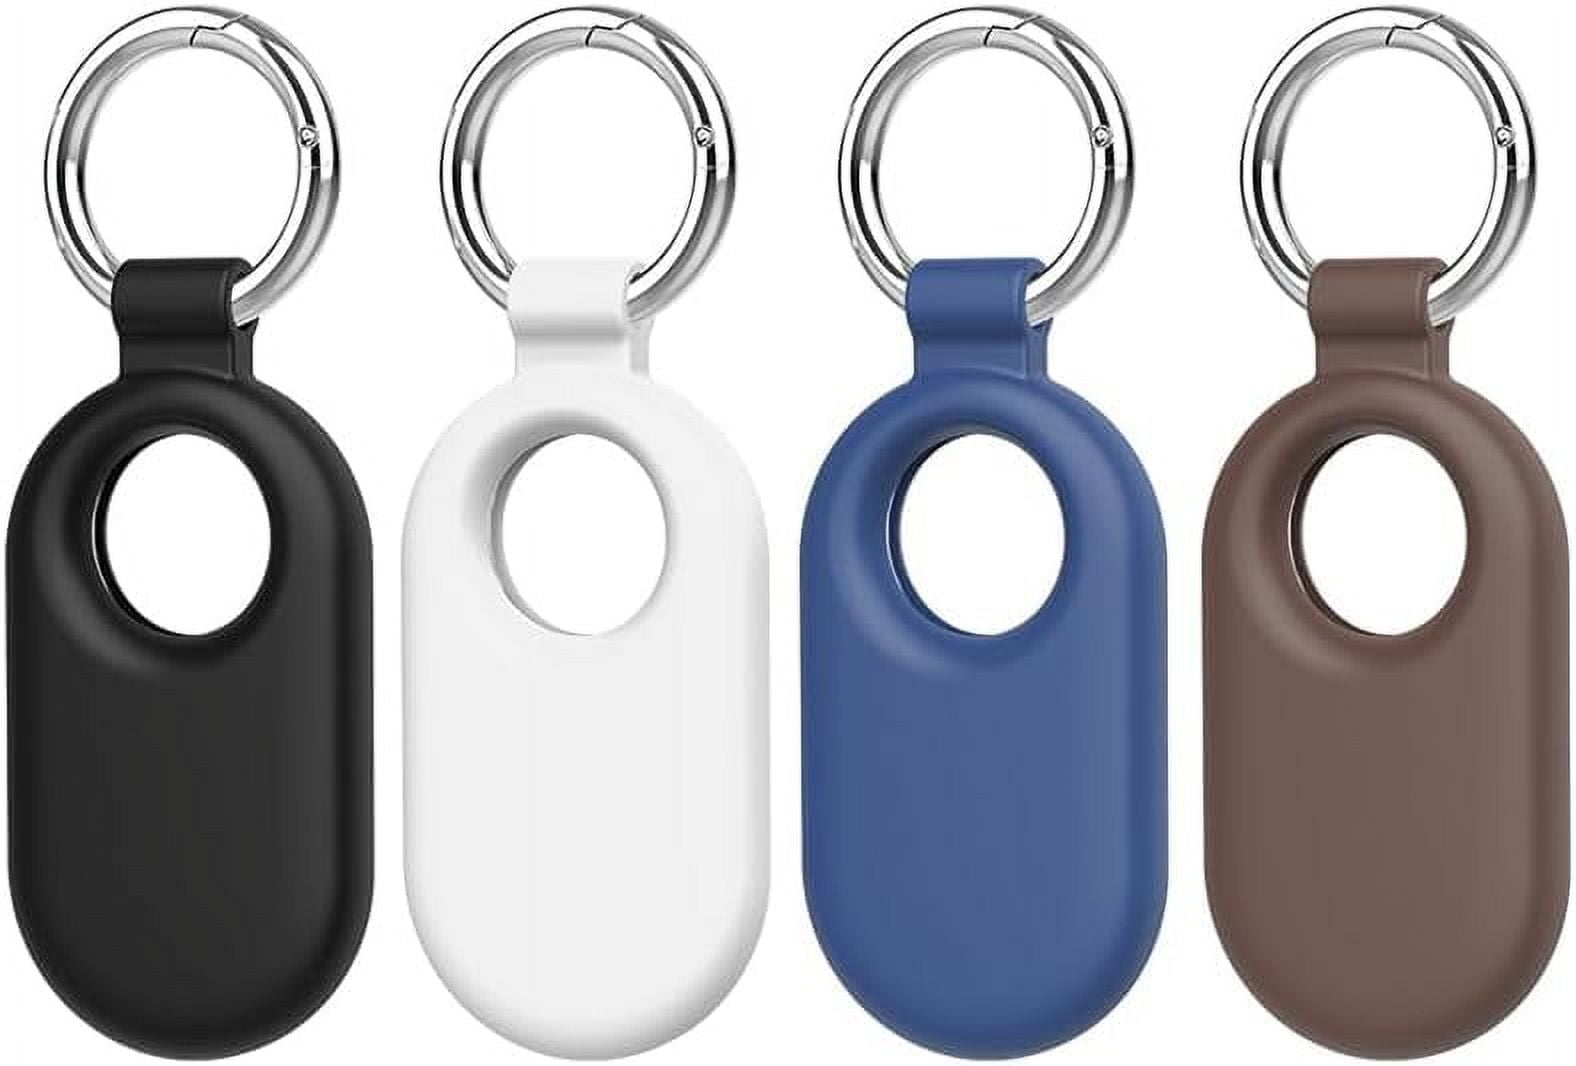 Samsung Galaxy SmartTag 2 specs and new, more keychain-friendly,  form-factor leaked by FCC -  News